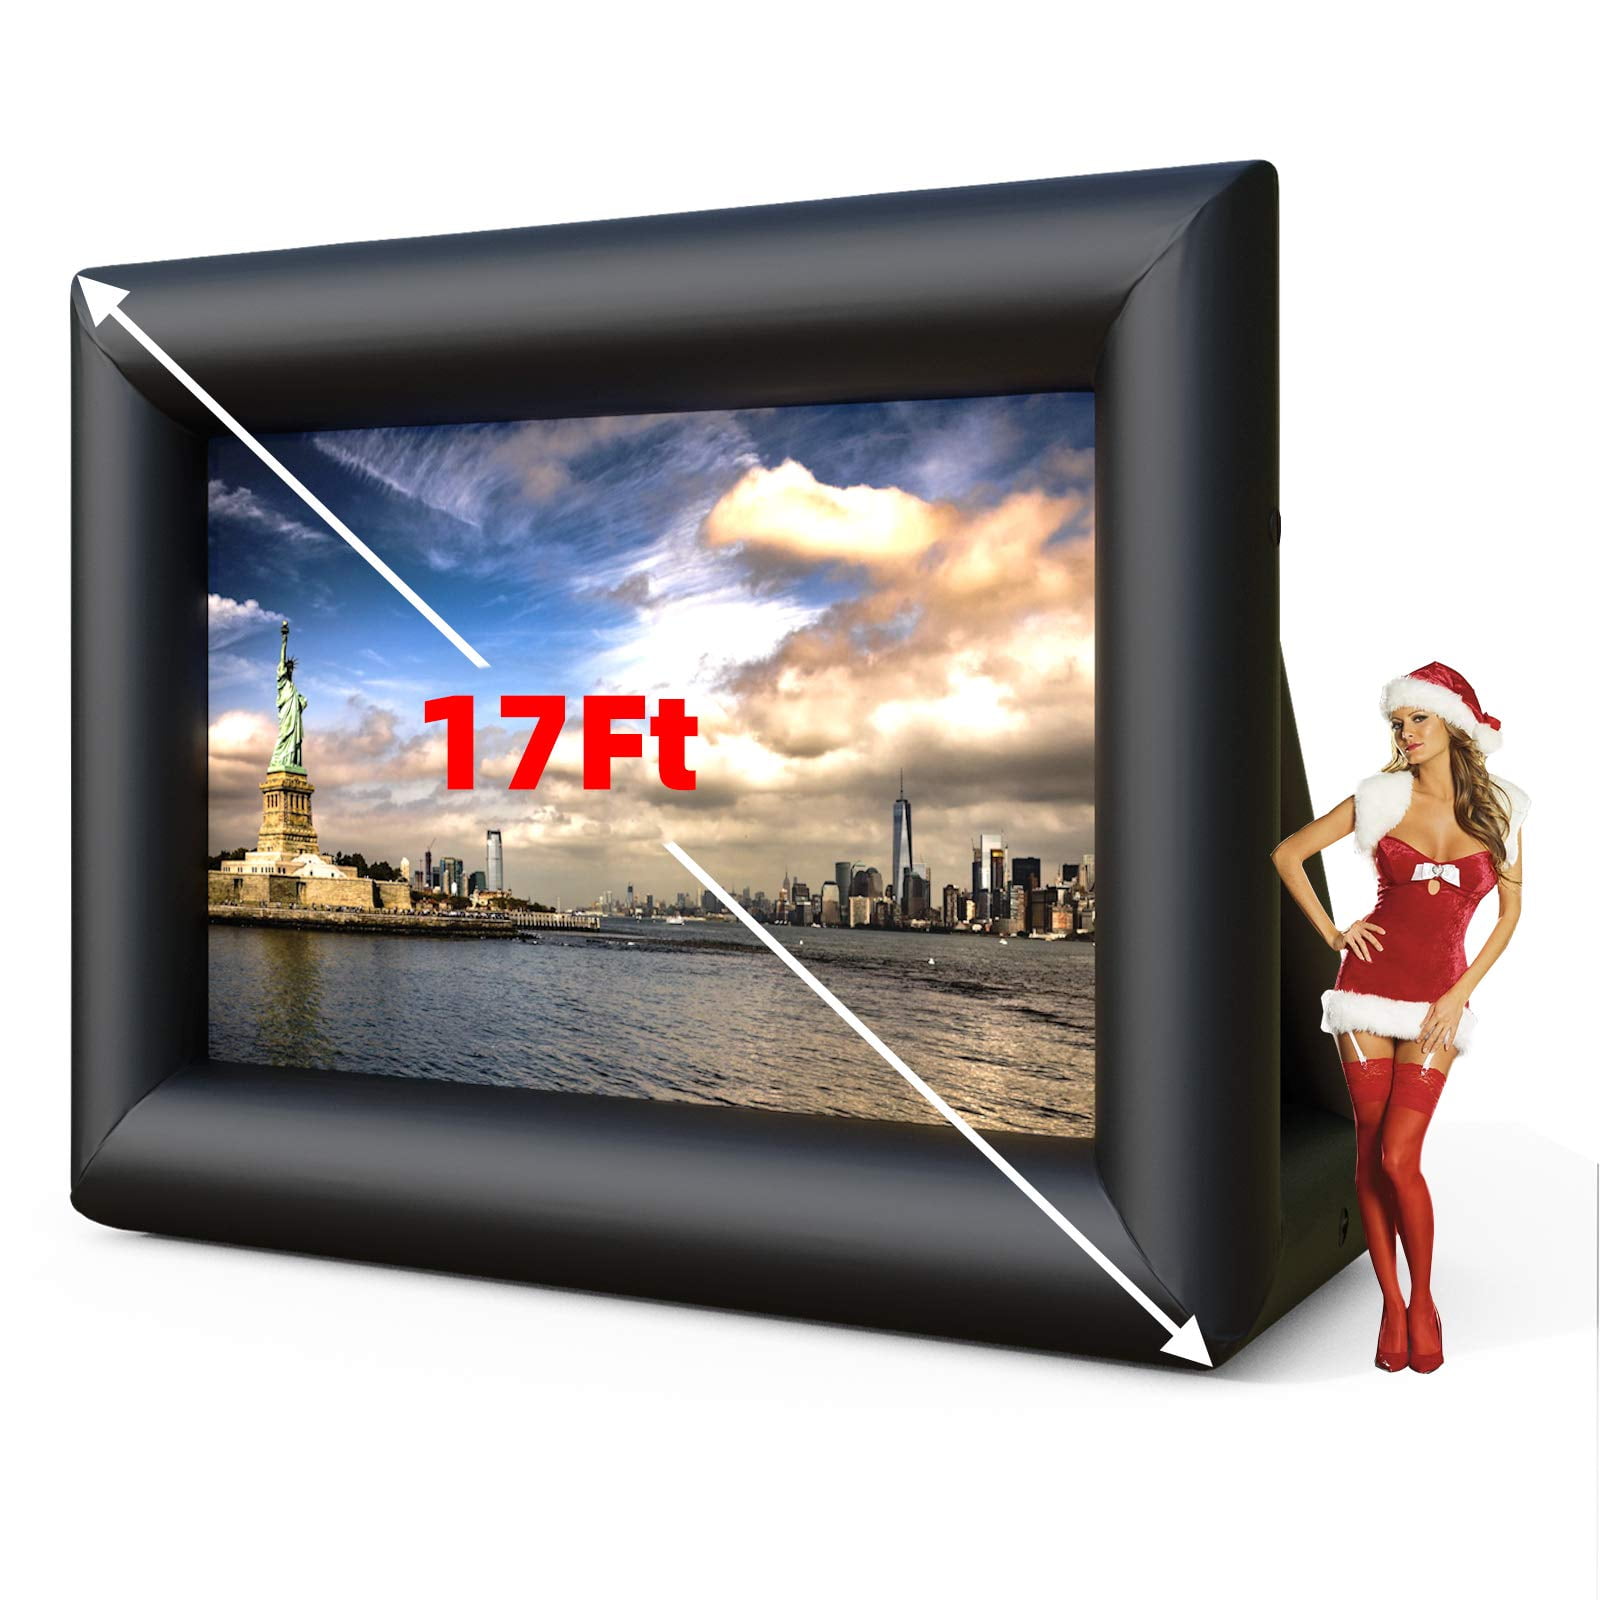 Blower Inflatable Movie Screen 17FT Projection Screen with Bag Nurxiovo 17ft Inflatable Movie Projector Screen Outdoor Stakes for Outdoor Backyard Movie Parties Pool Lawn Event Strings 